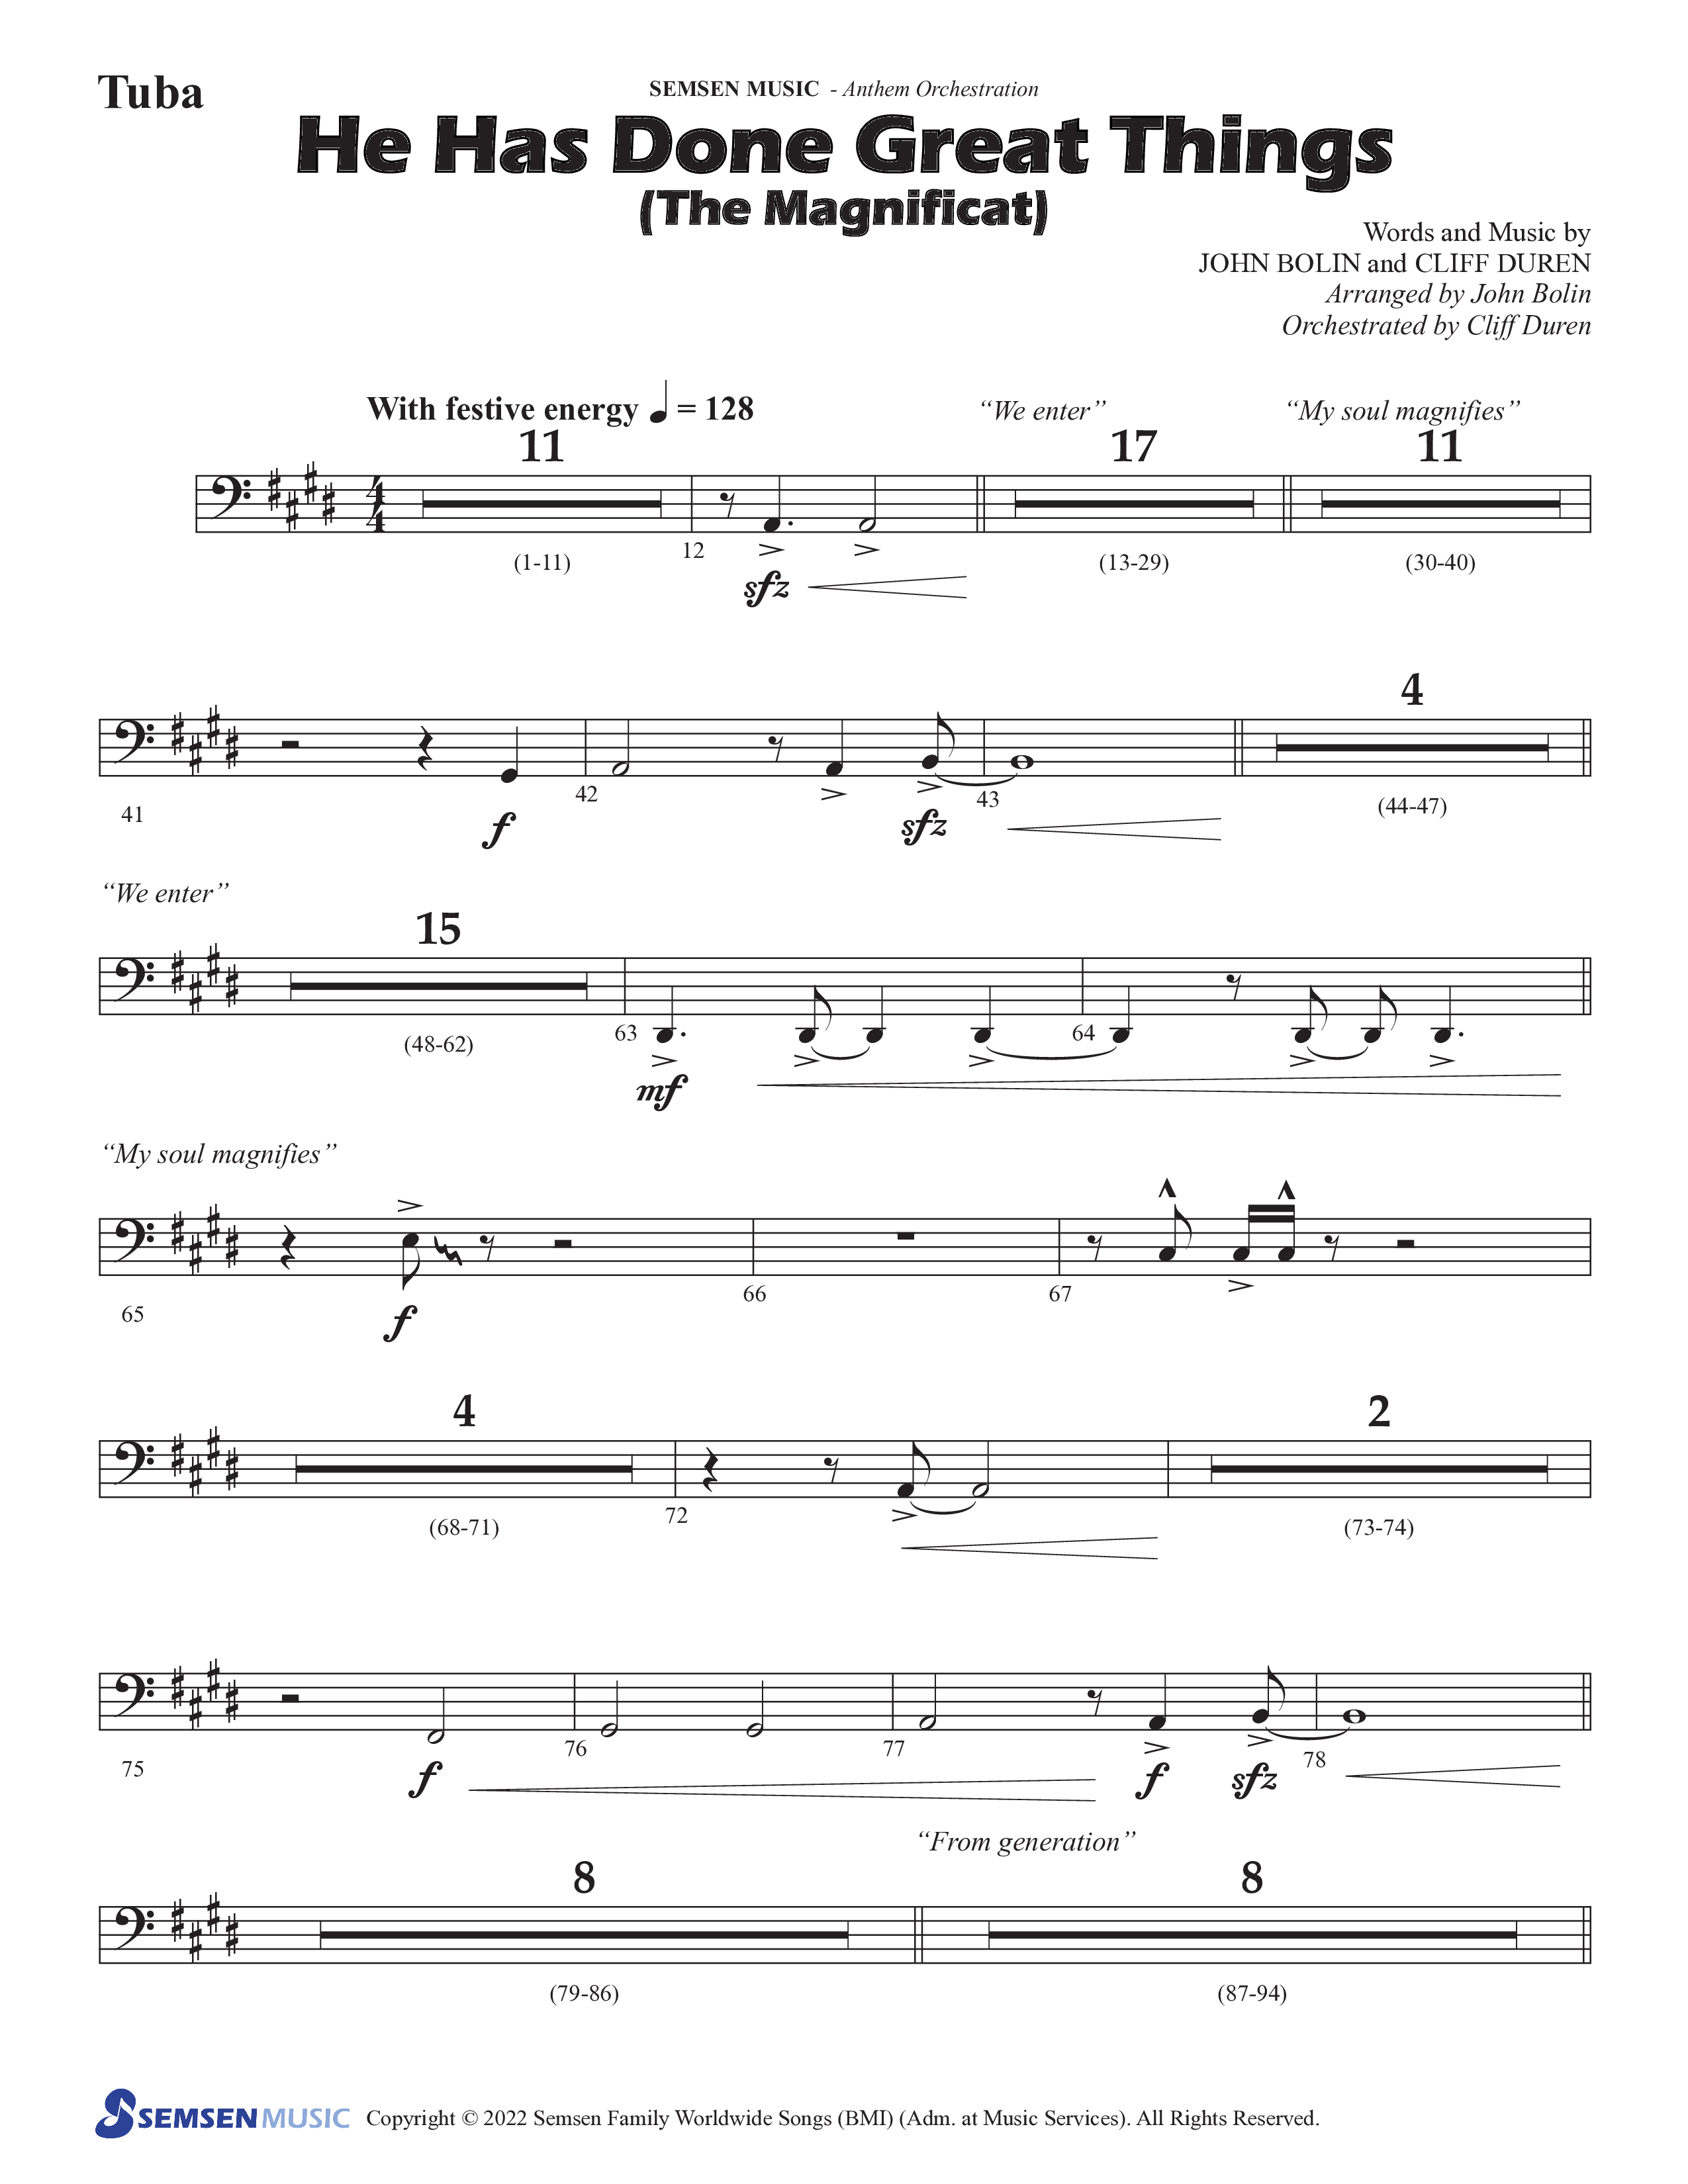 He Has Done Great Things (The Magnificat) (Choral Anthem SATB) Tuba (Semsen Music / Arr. John Bolin / Orch. Cliff Duren)